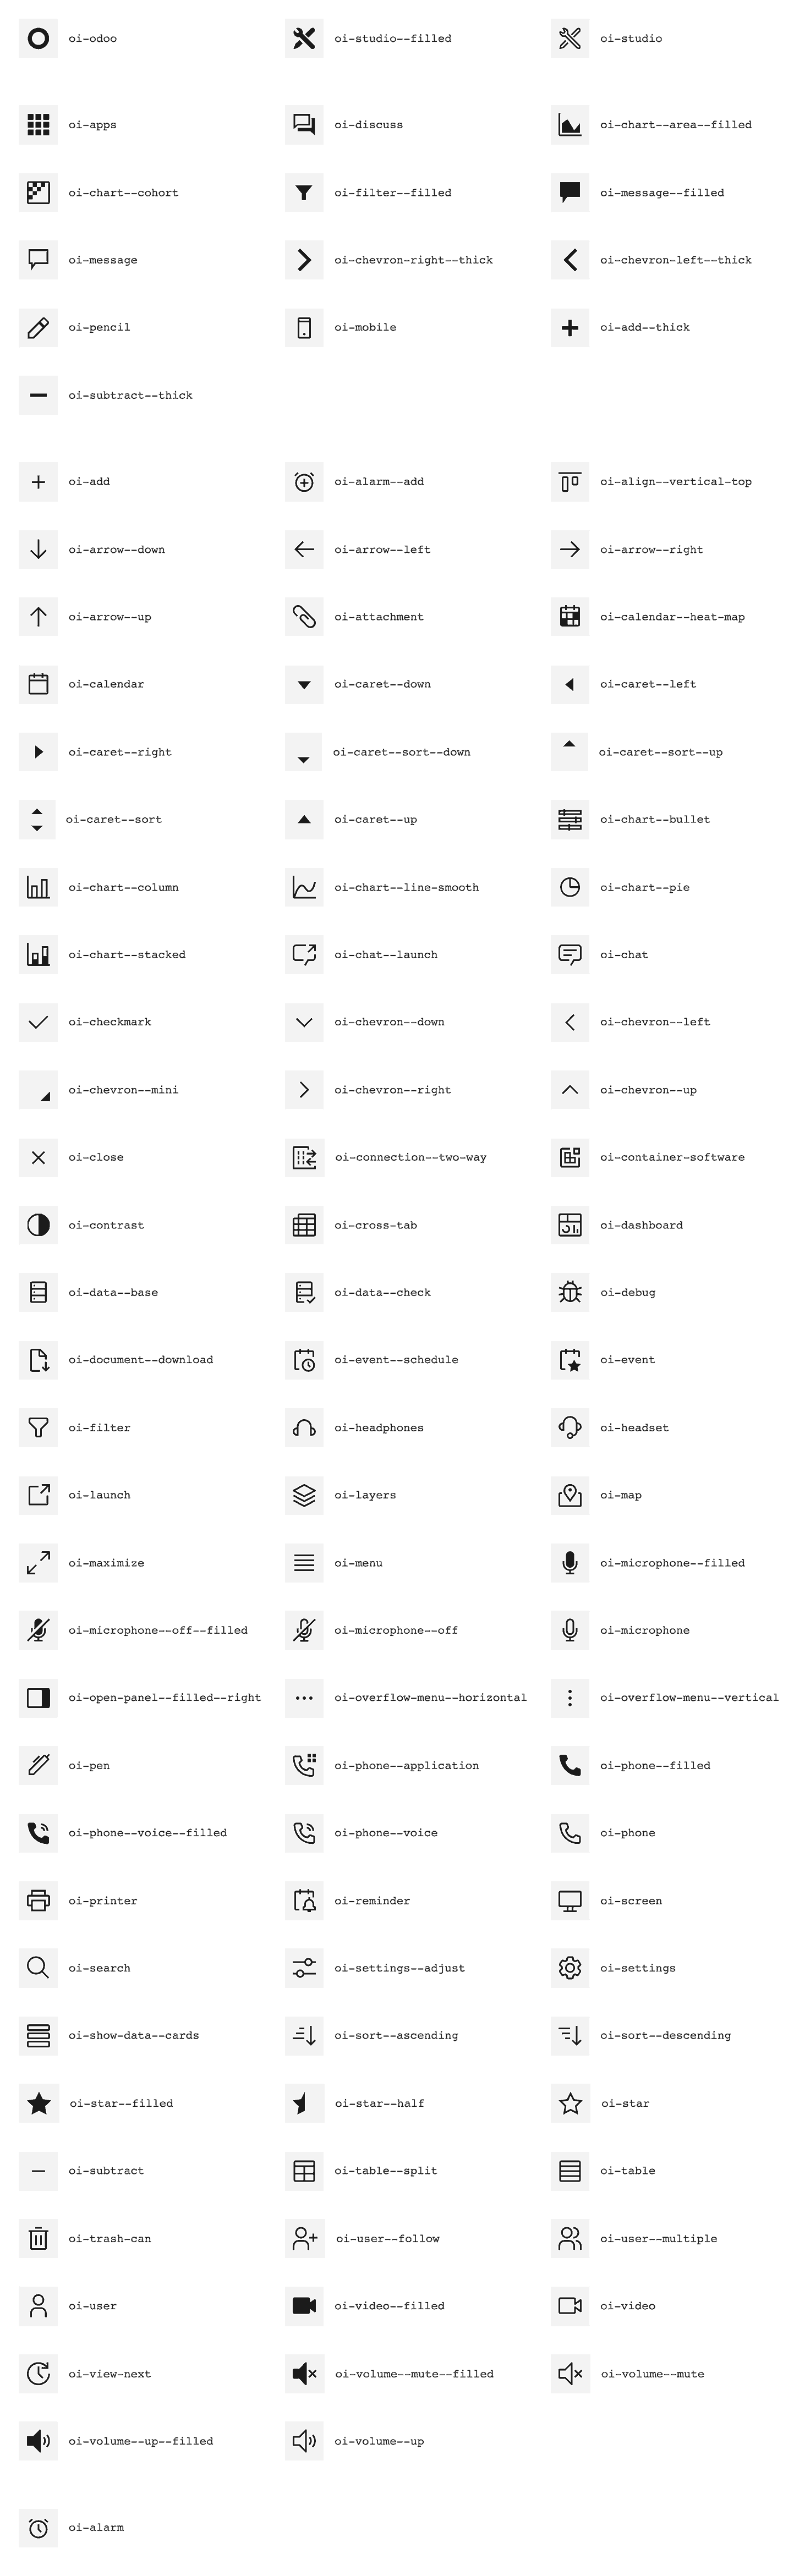 ../../../_images/odoo-ui-icons.png